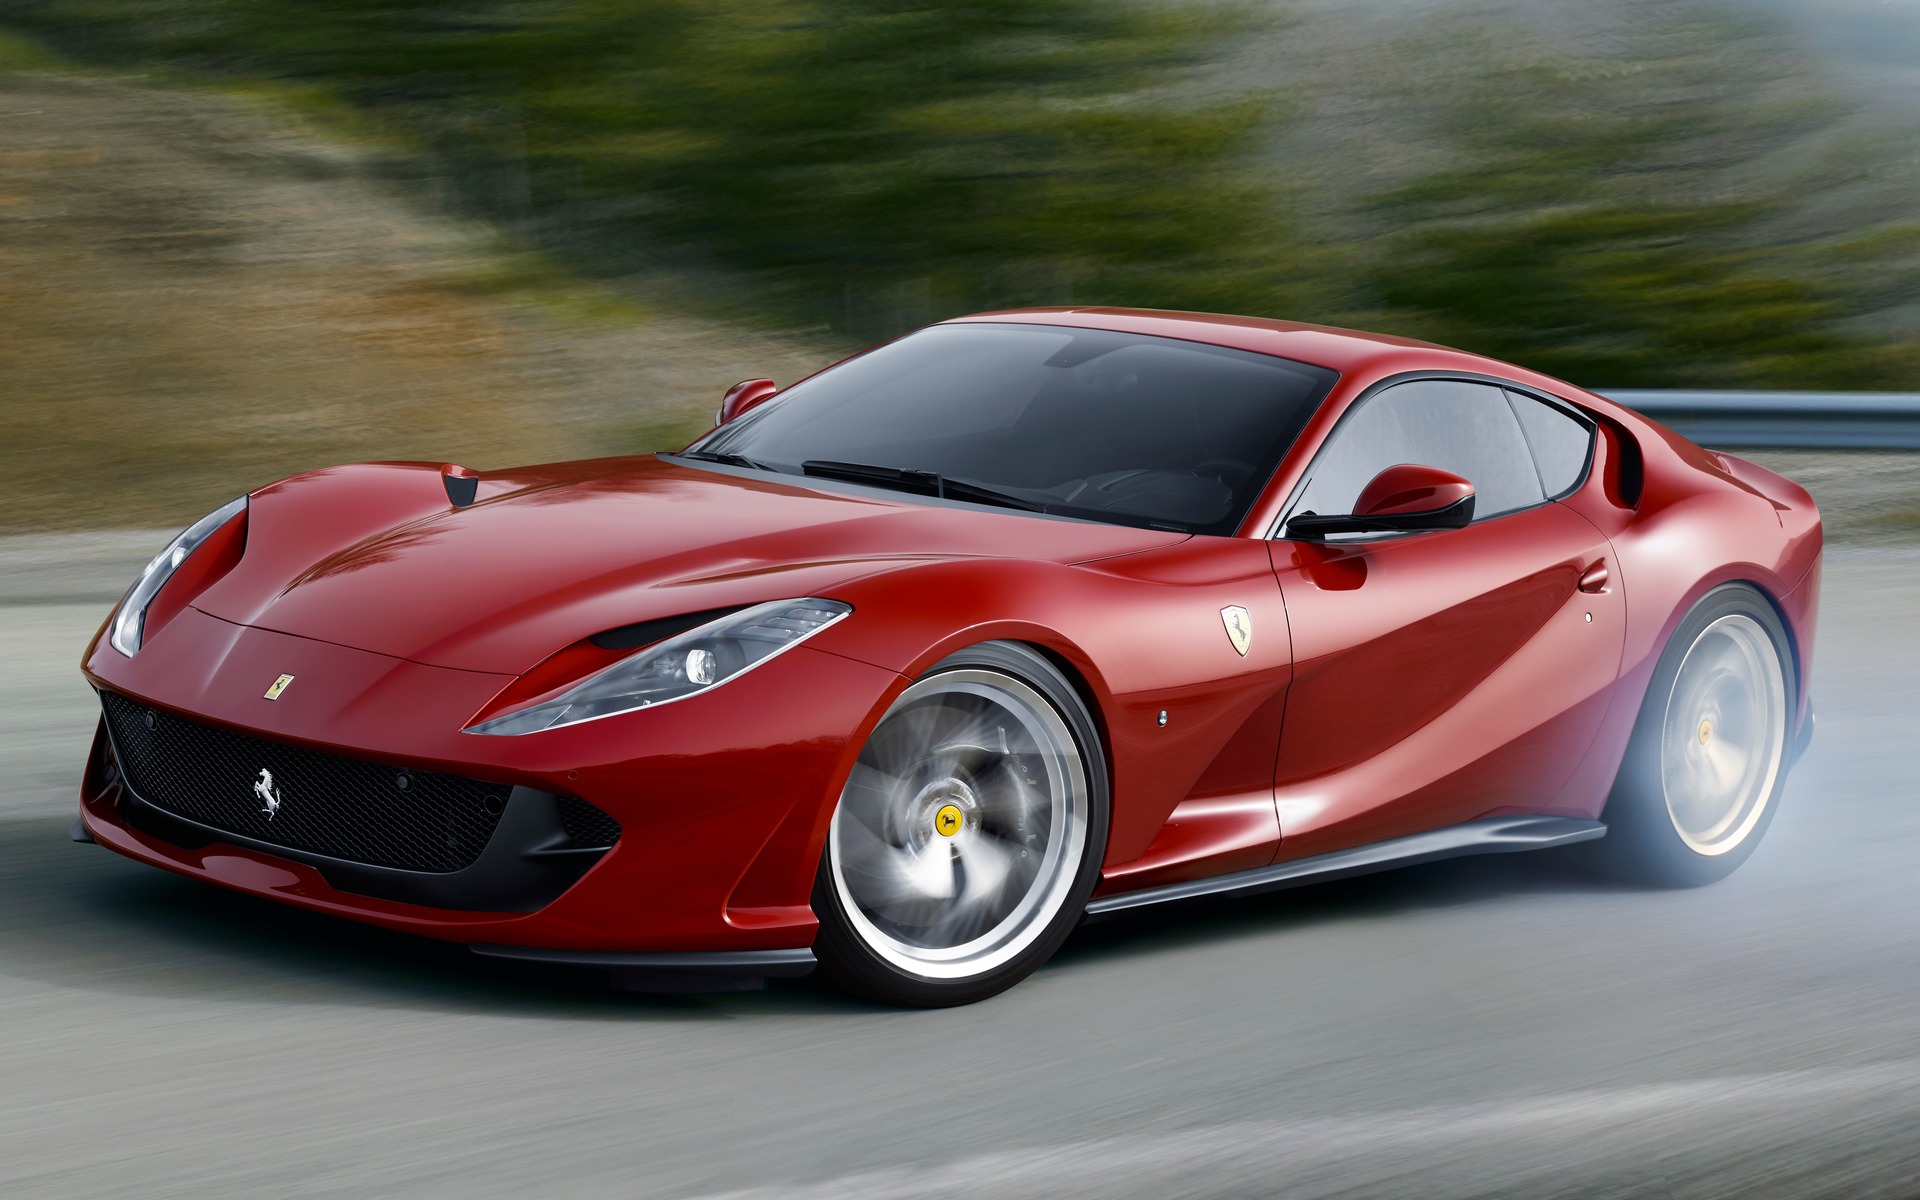 2019 Ferrari 812 Superfast Specifications The Car Guide